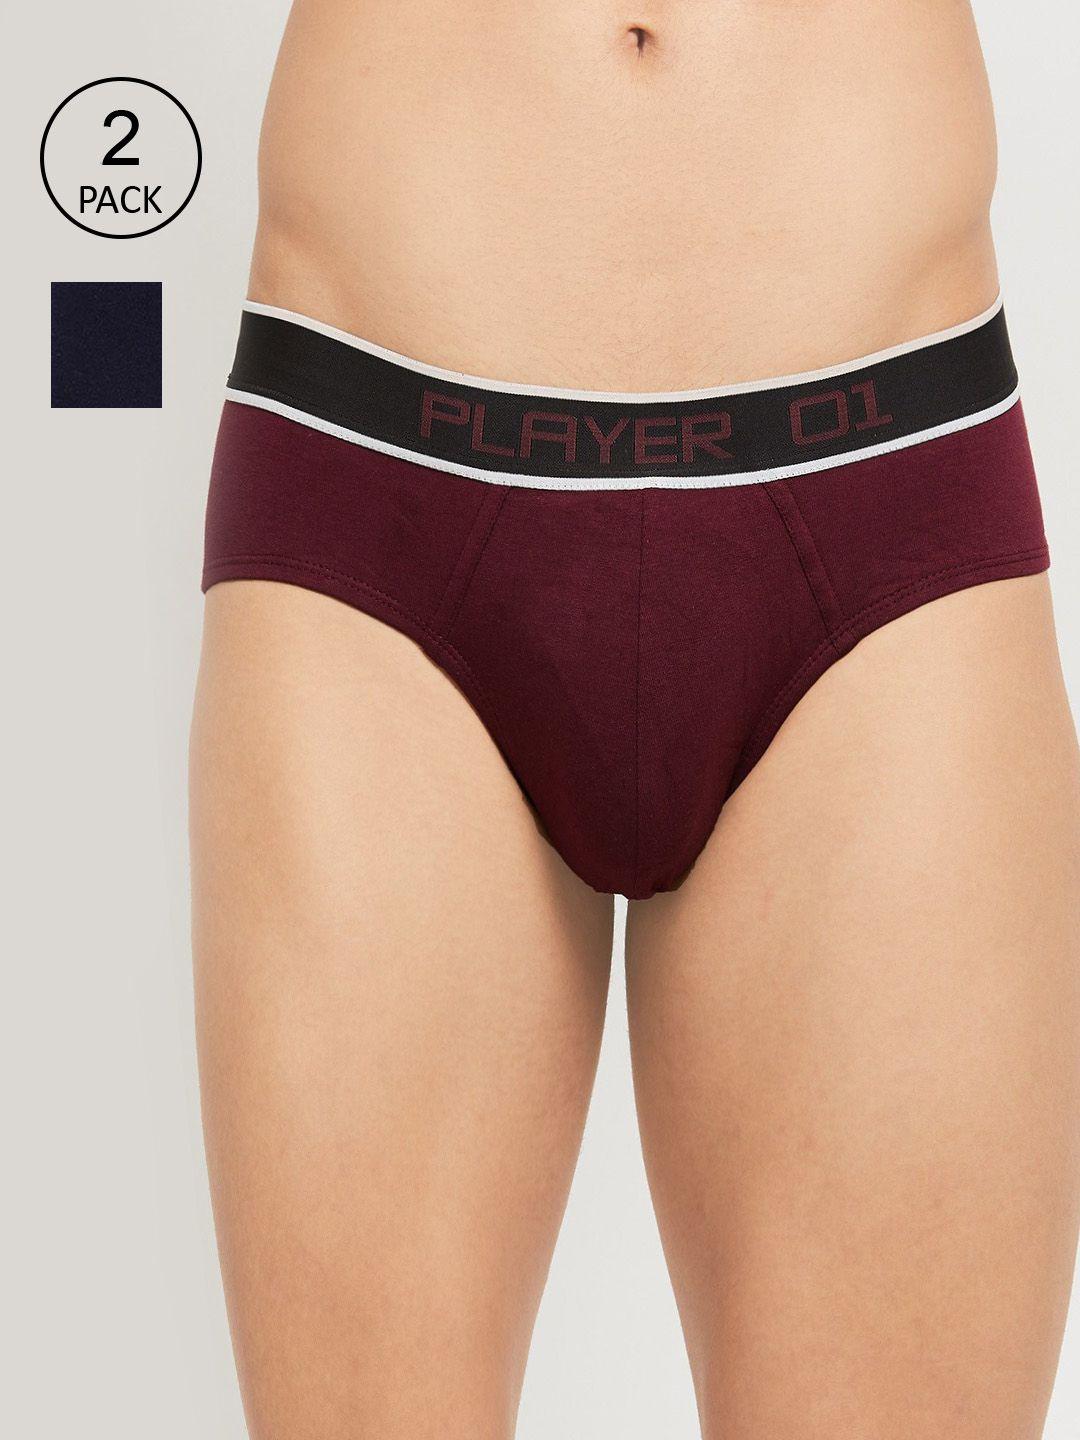 max men navy blue and burgundy pack of 2 solid deo-soft basic briefs